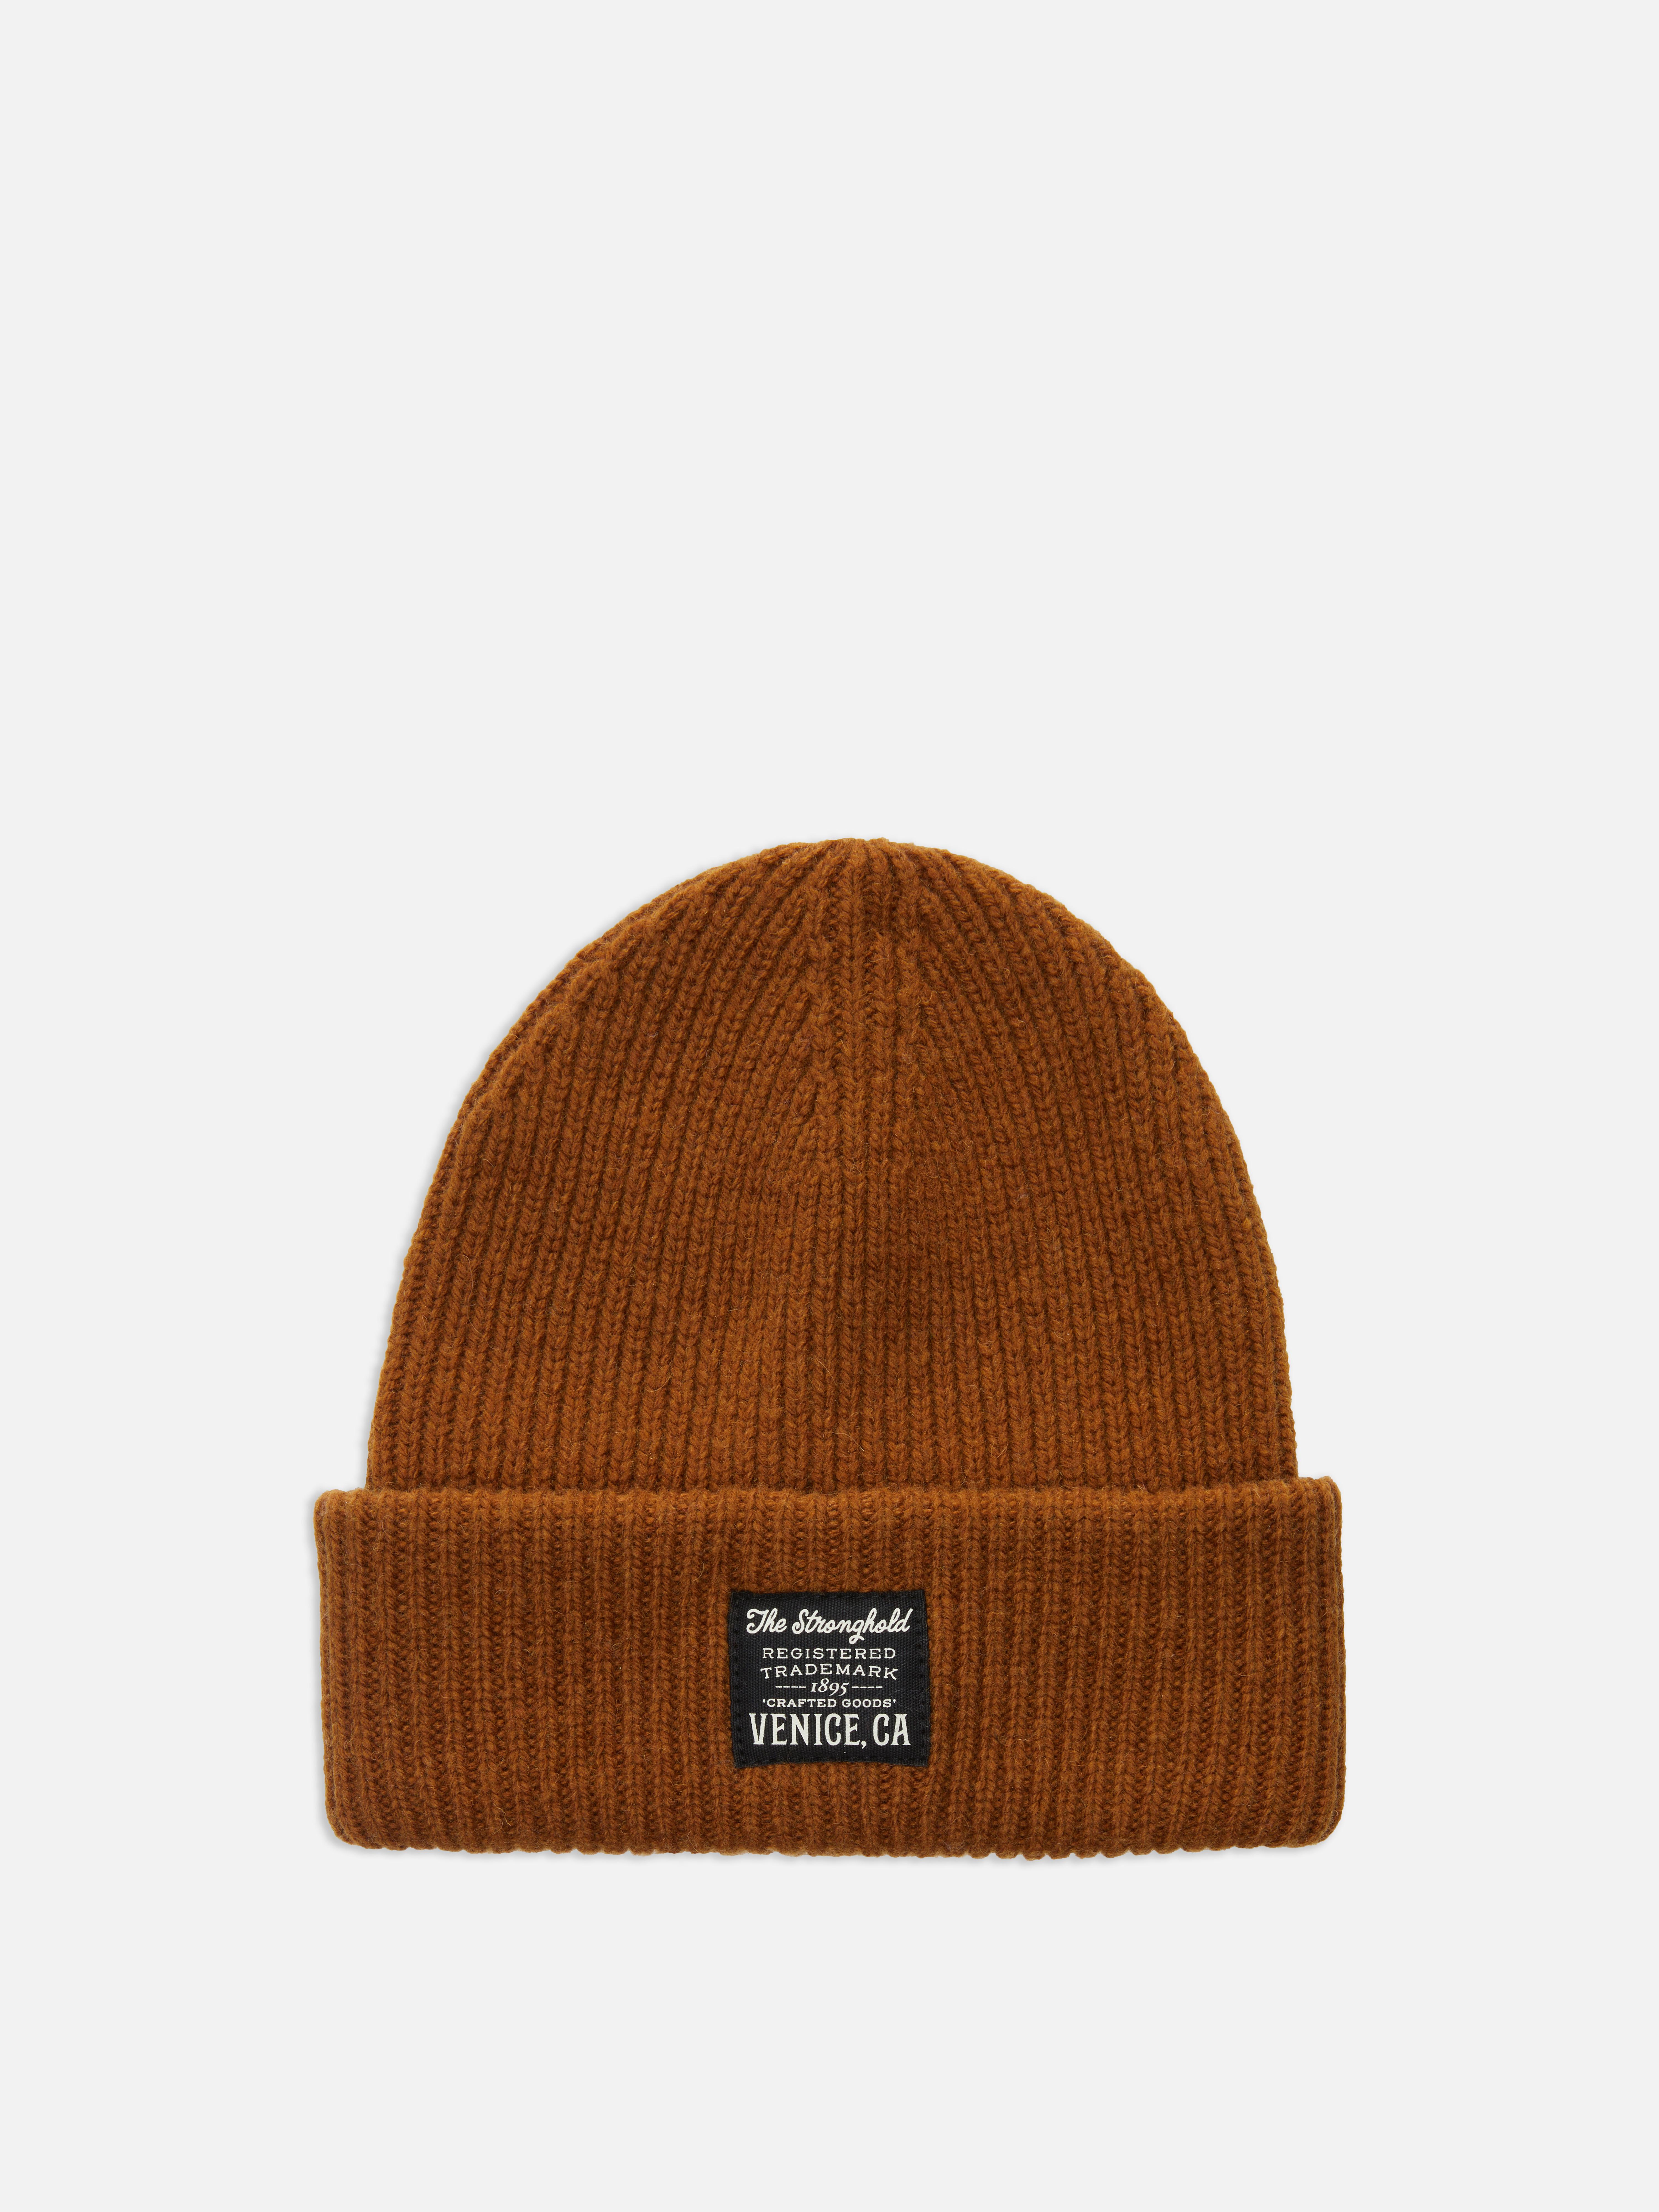 The Stronghold Beanie